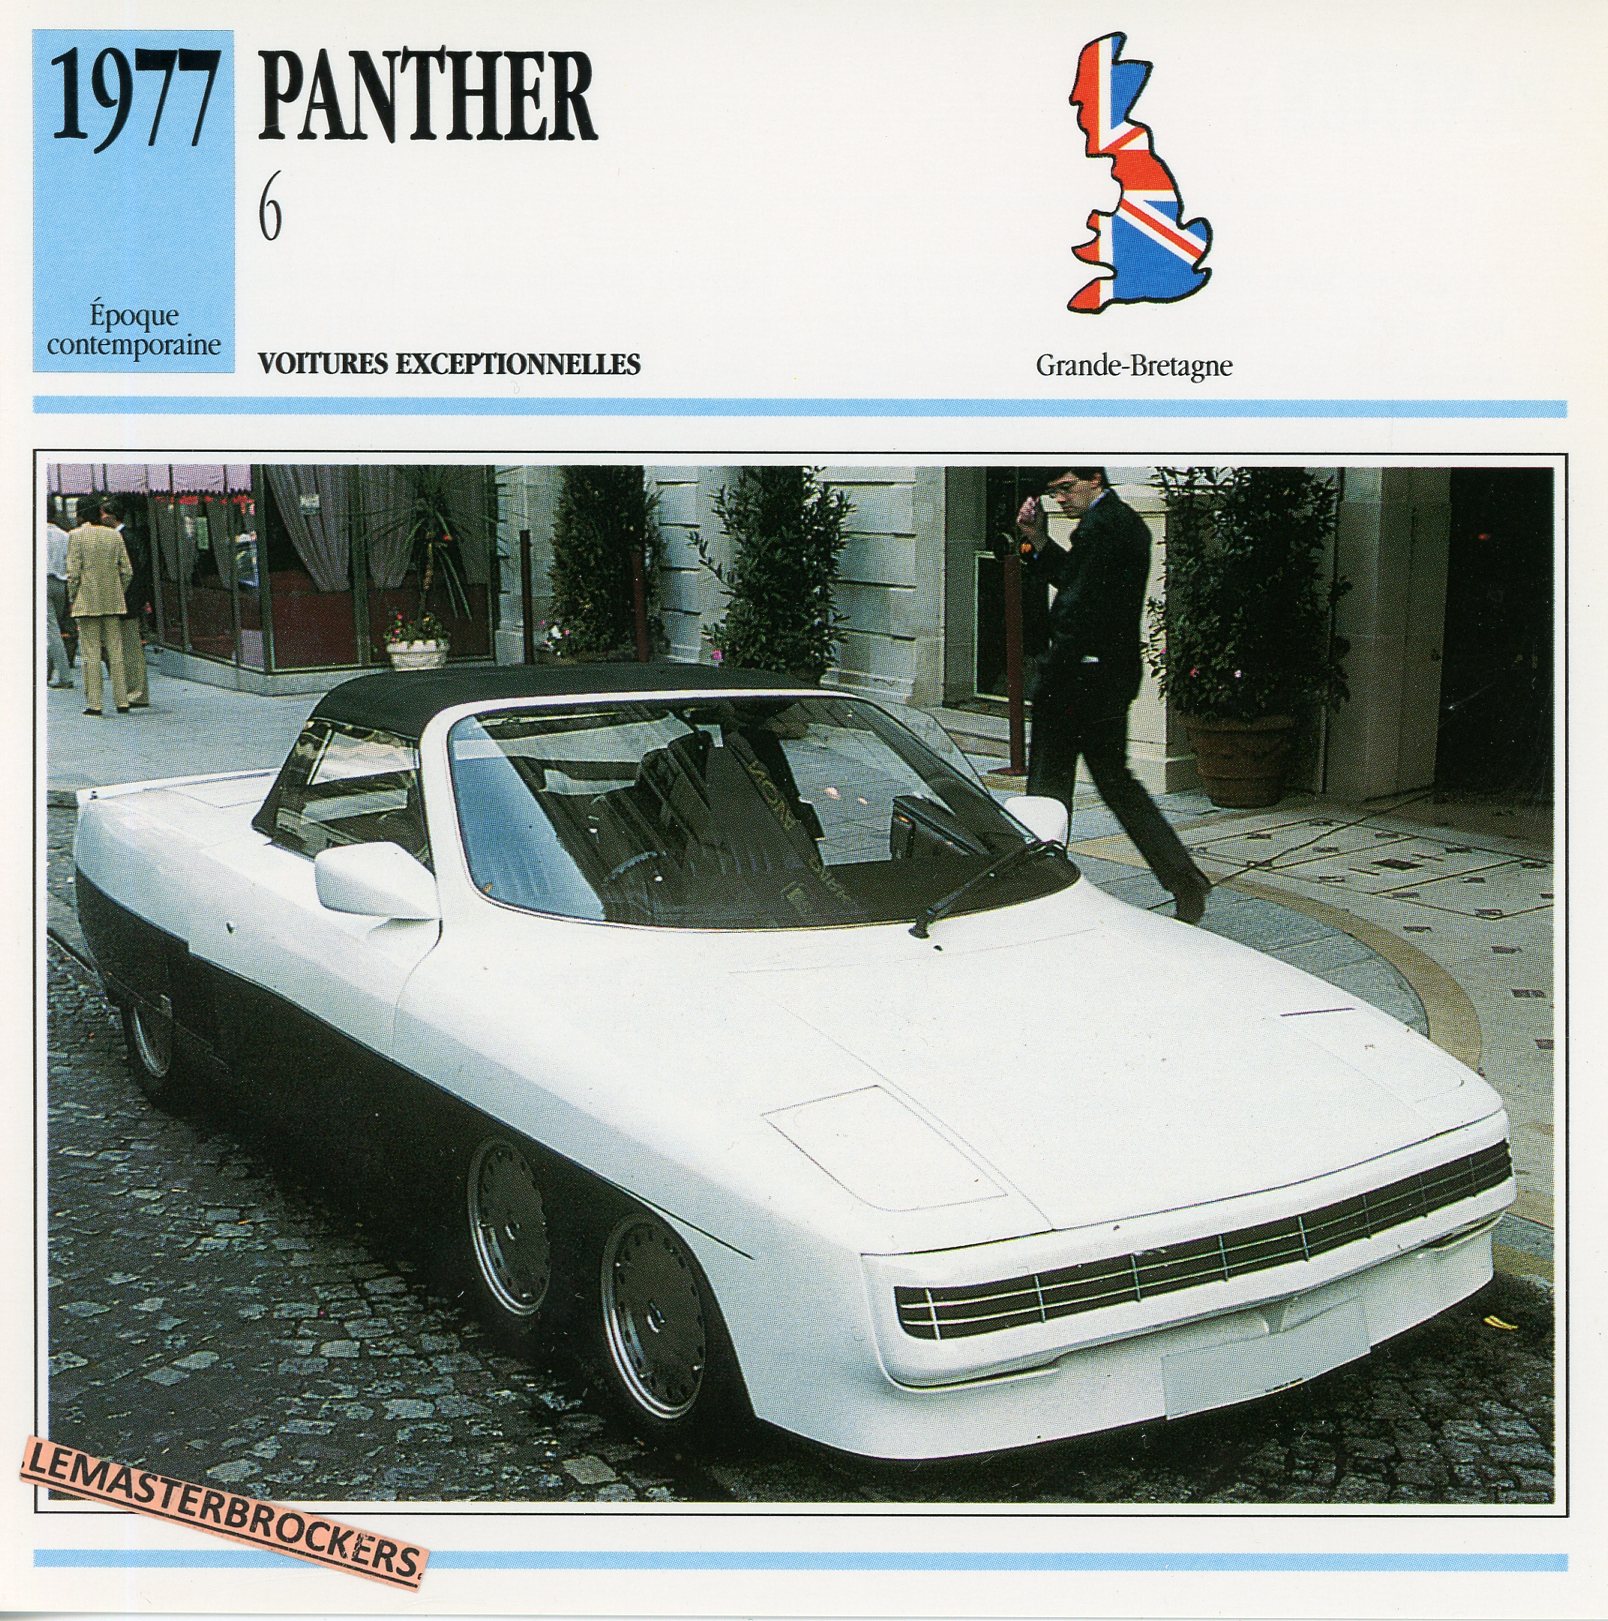 FICHE-PANTHER-6-LEMASTERBROCKERS-FICHE-AUTO-CARS-CARD-ATLAS-FRENCH